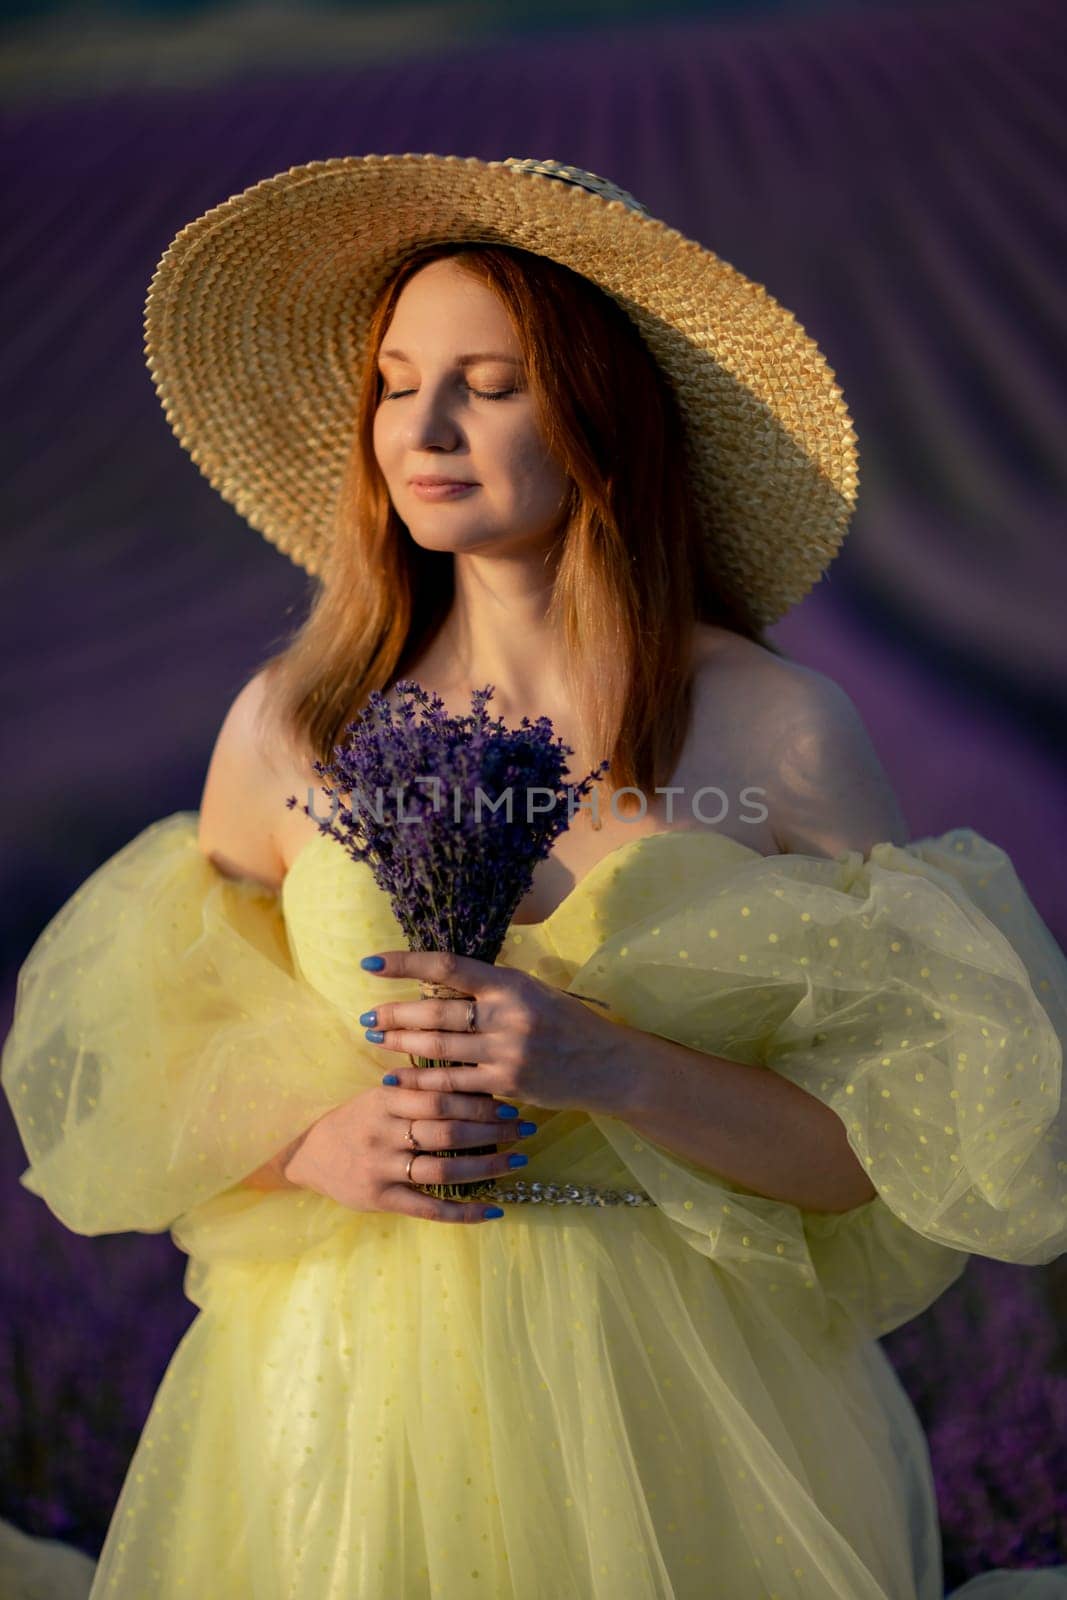 Lavender sunset girl. A laughing girl in a blue dress with flowing hair in a hat walks through a lilac field, holds a bouquet of lavender in her hands. by Matiunina